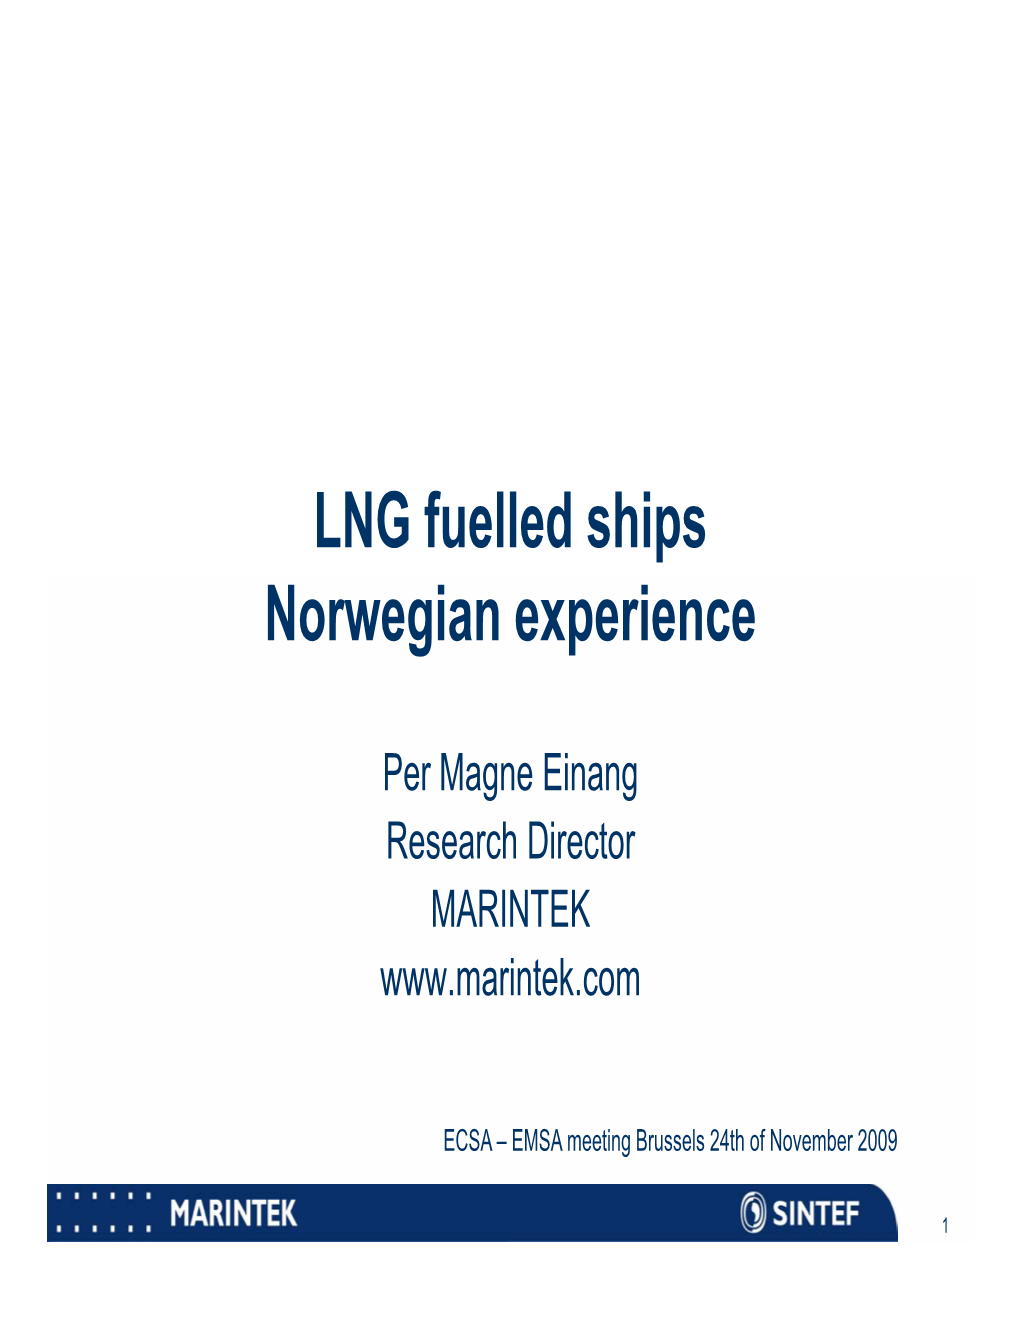 LNG Fuelled Ships Norwegian Experience